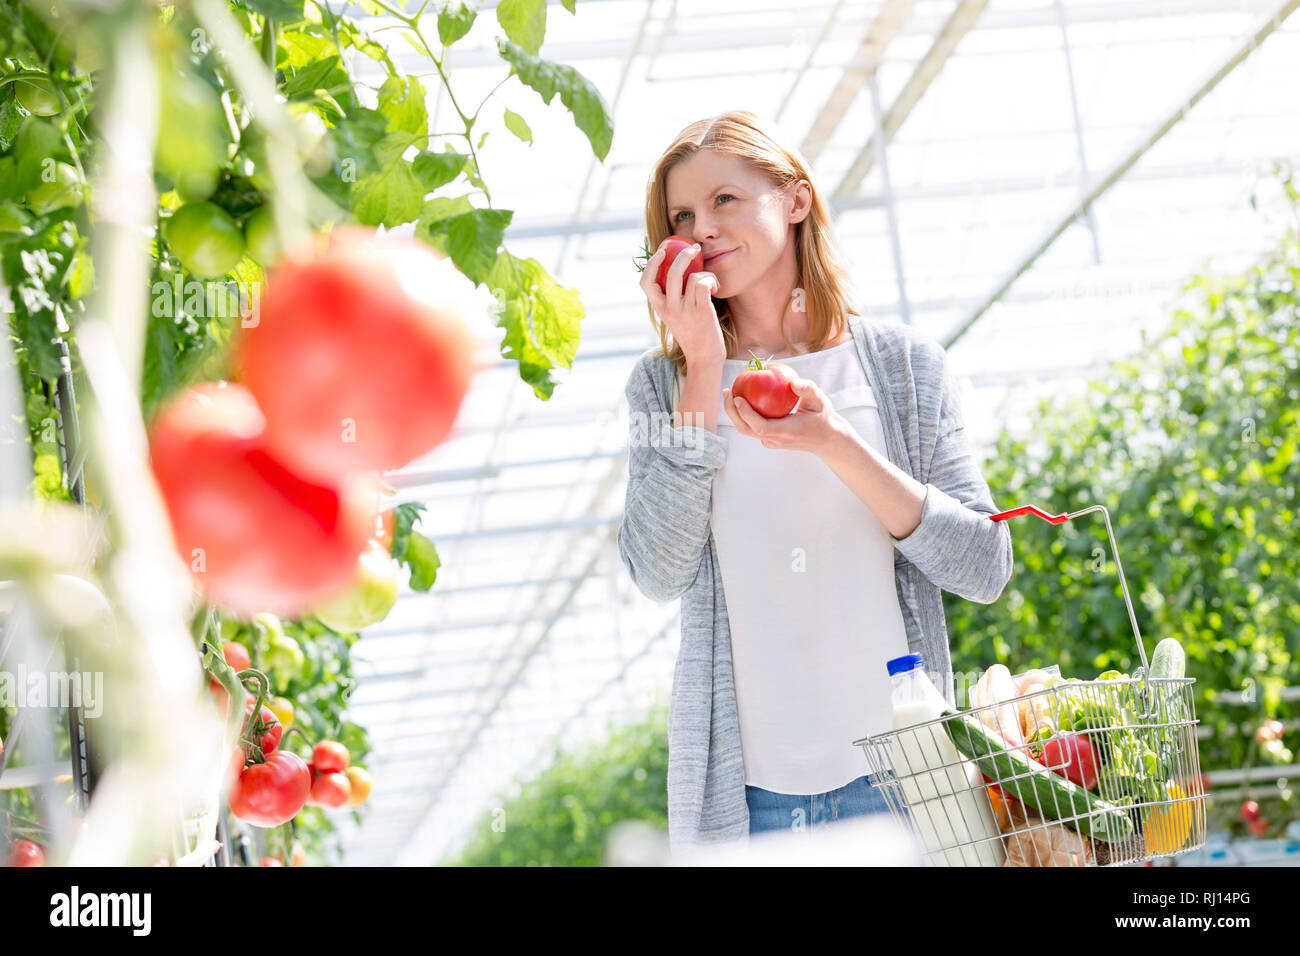 Woman buying fresh tomatoes in greenhouse Stock Photo